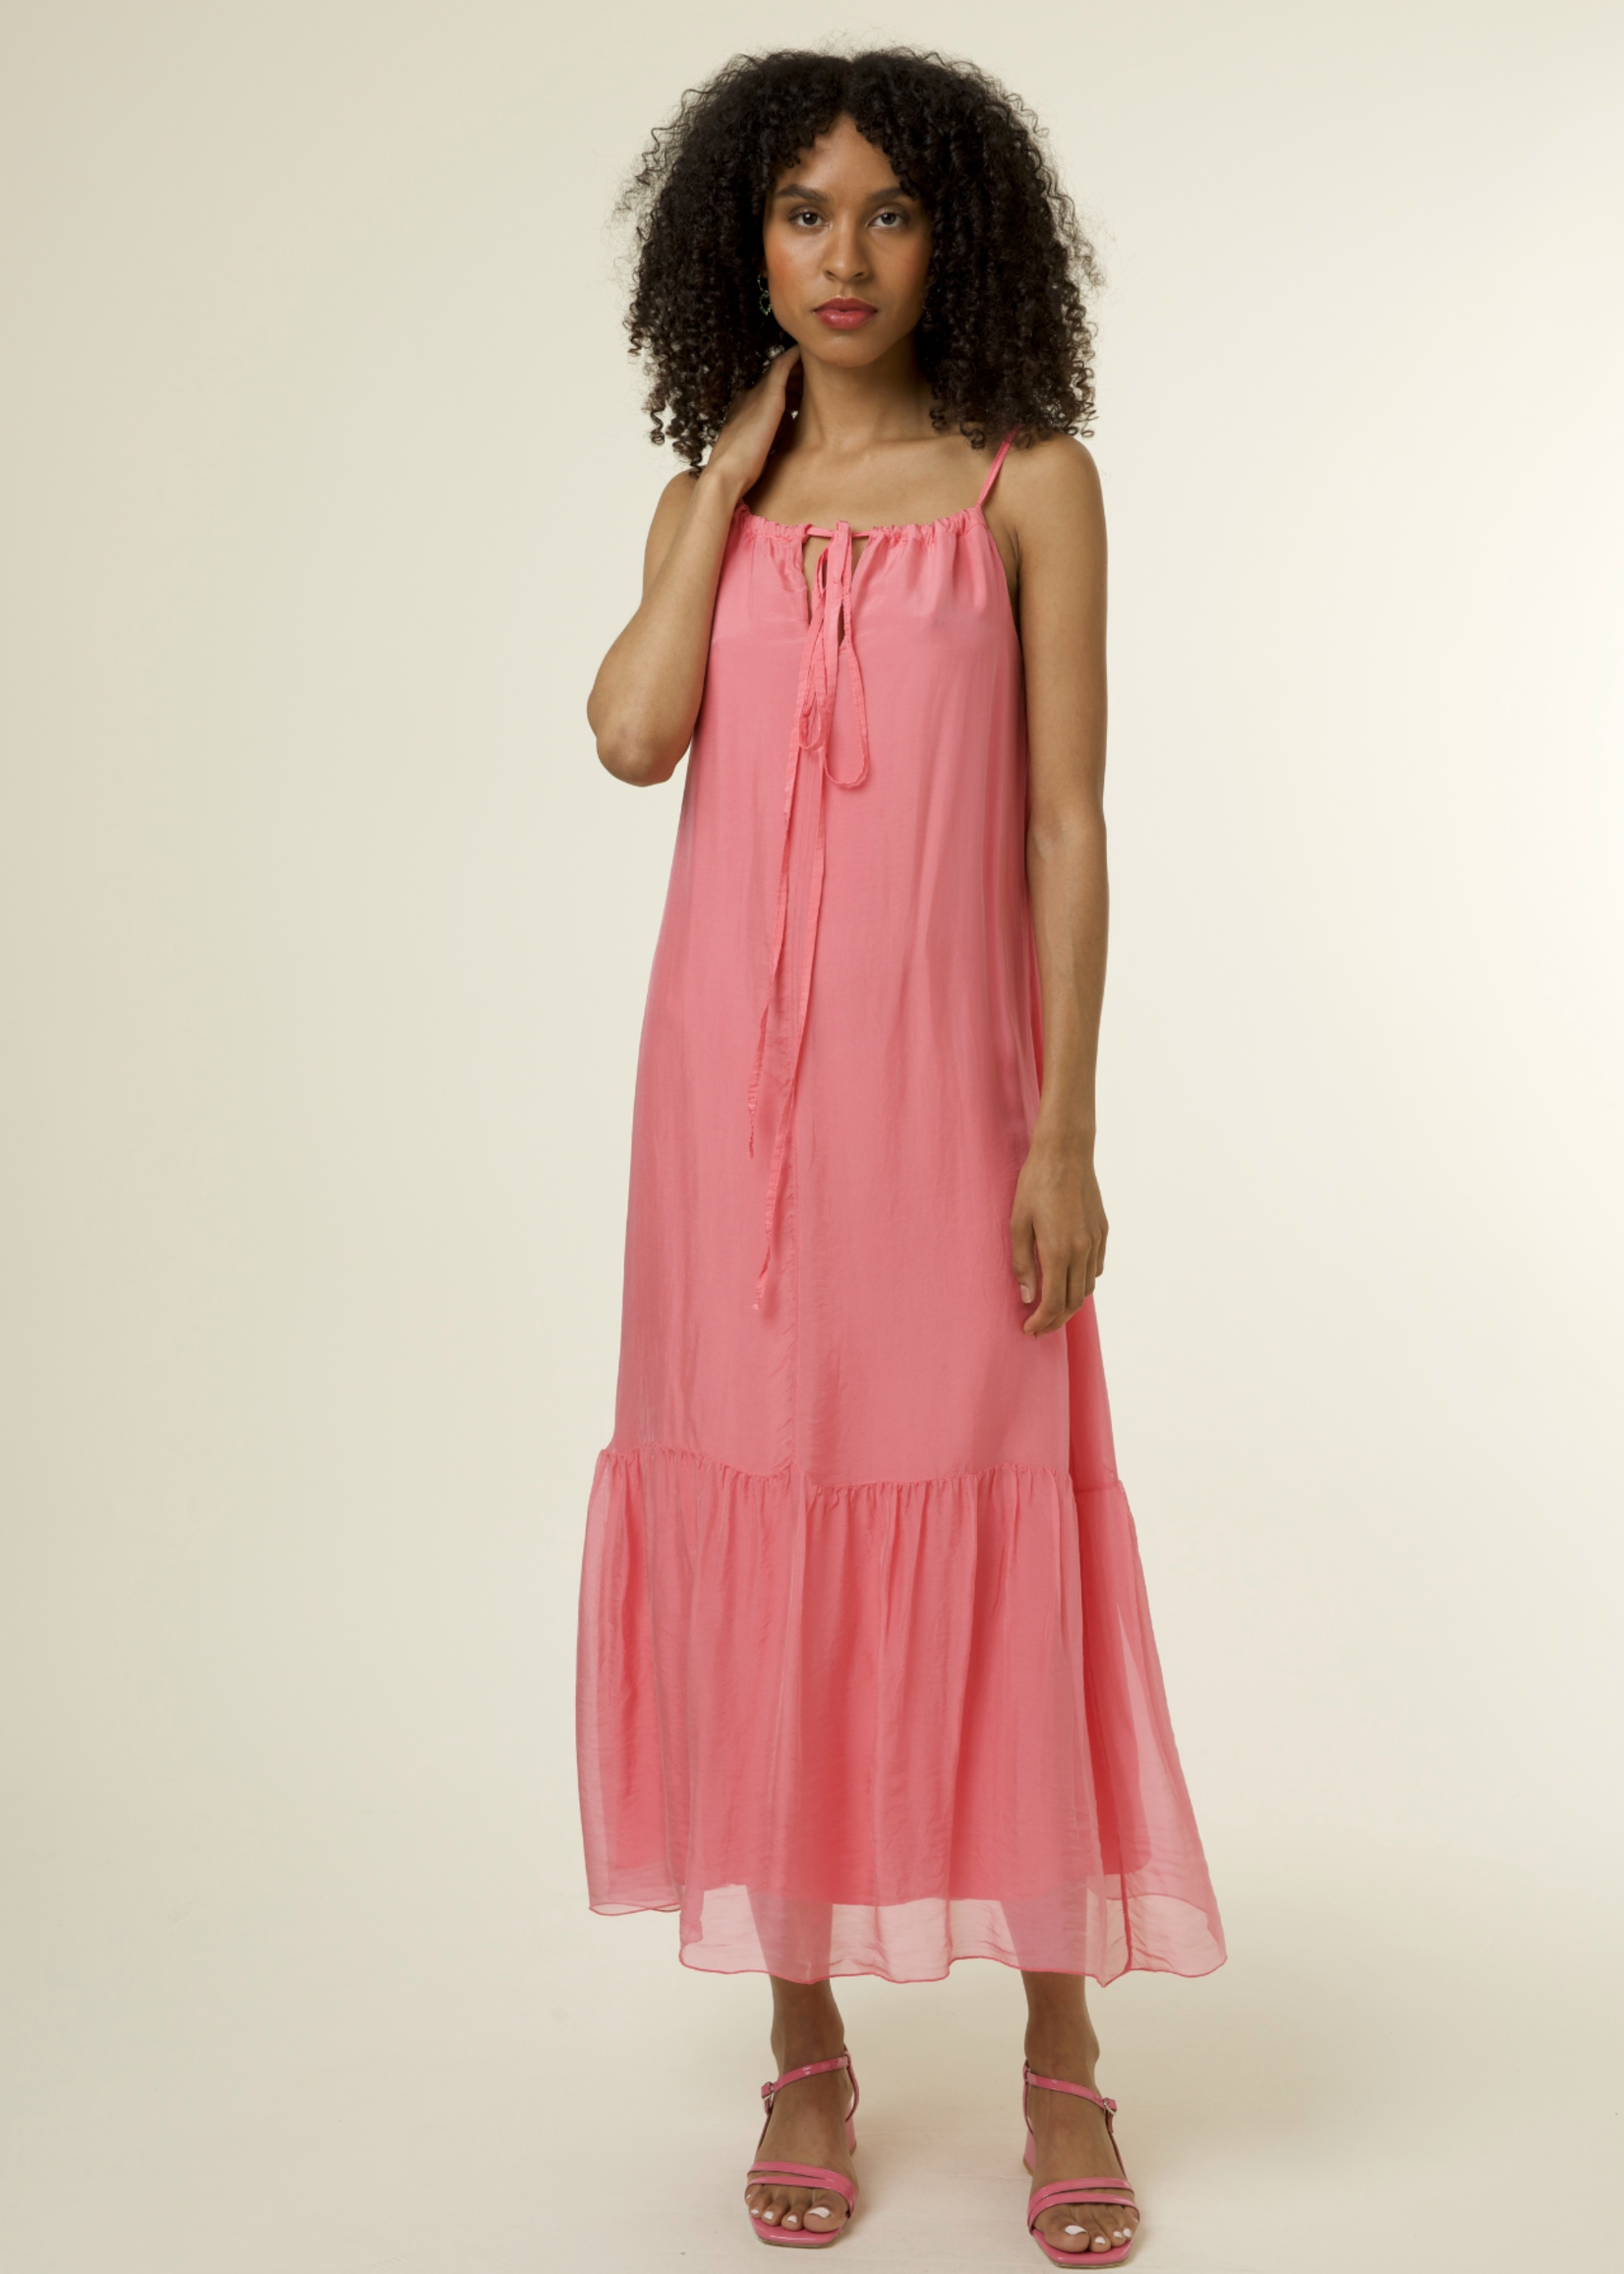 Elitaire Boutique Wendi Dress in Pink